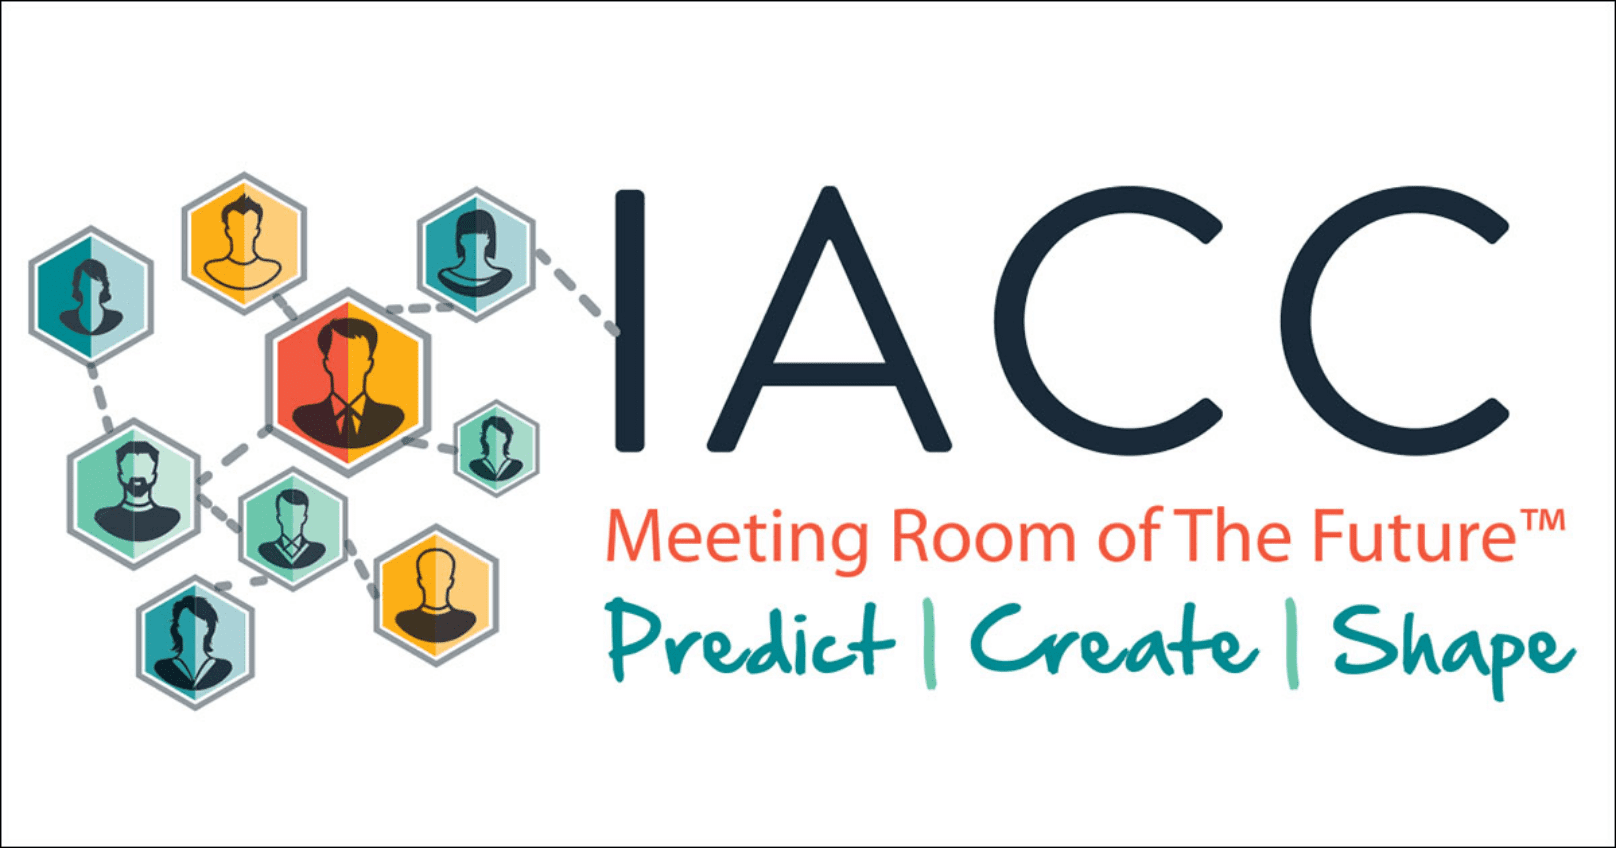 IACC Meeting Room of the Future